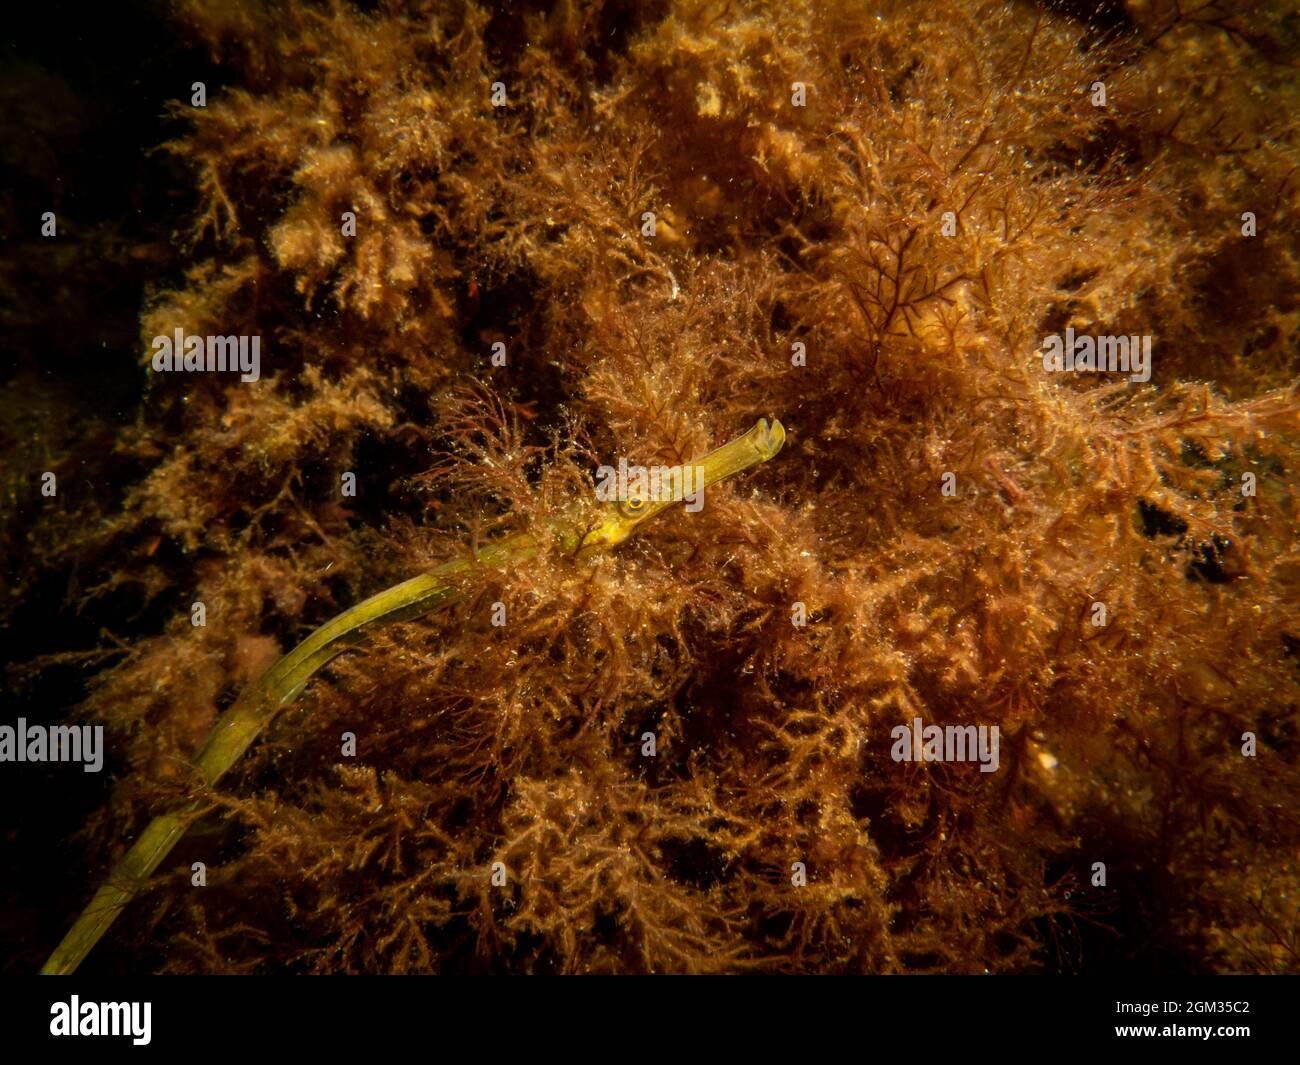 A close-up picture of a straightnose pipefish, Nerophis ophidion, among seaweed and stones. Picture from The Sound, between Sweden and Denmark Stock Photo